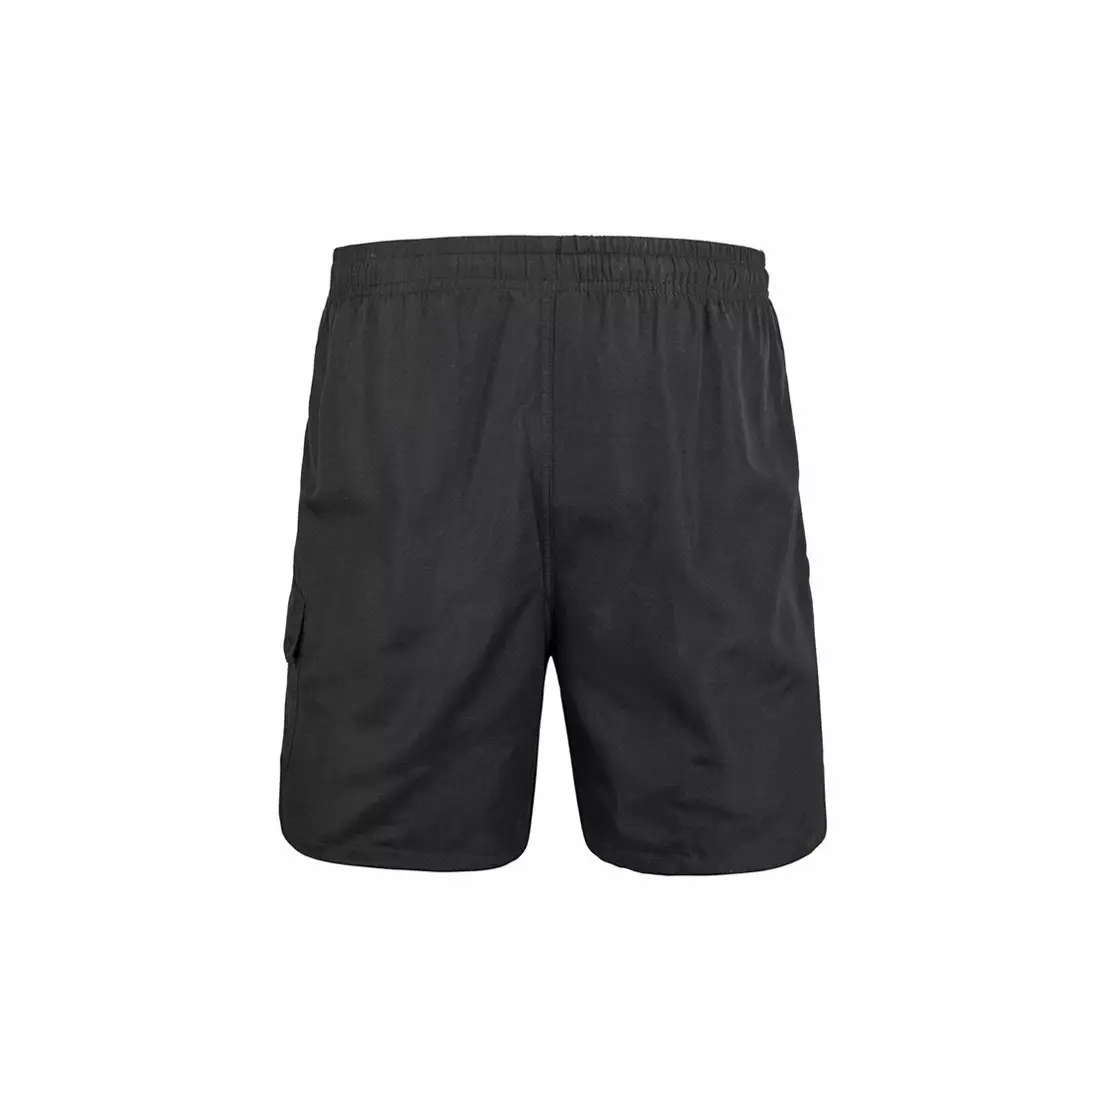 SANTIC men's loose cycling shorts with insert, black WC05003